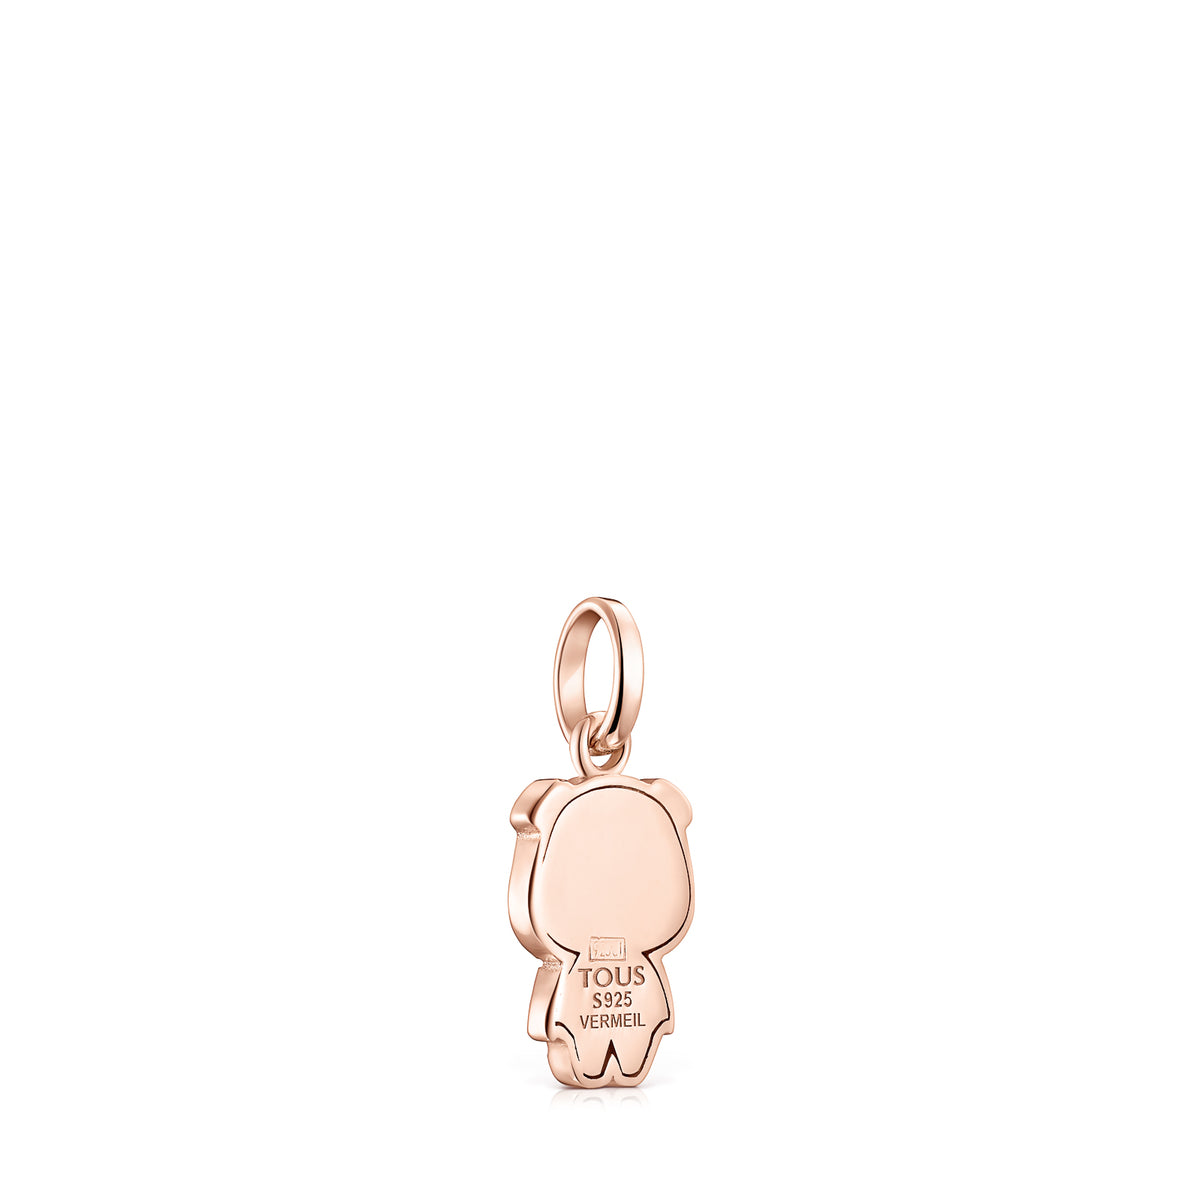 Tous Chinese Horoscope Pig Pendant in Rose Gold Vermeil with Ruby 918434540